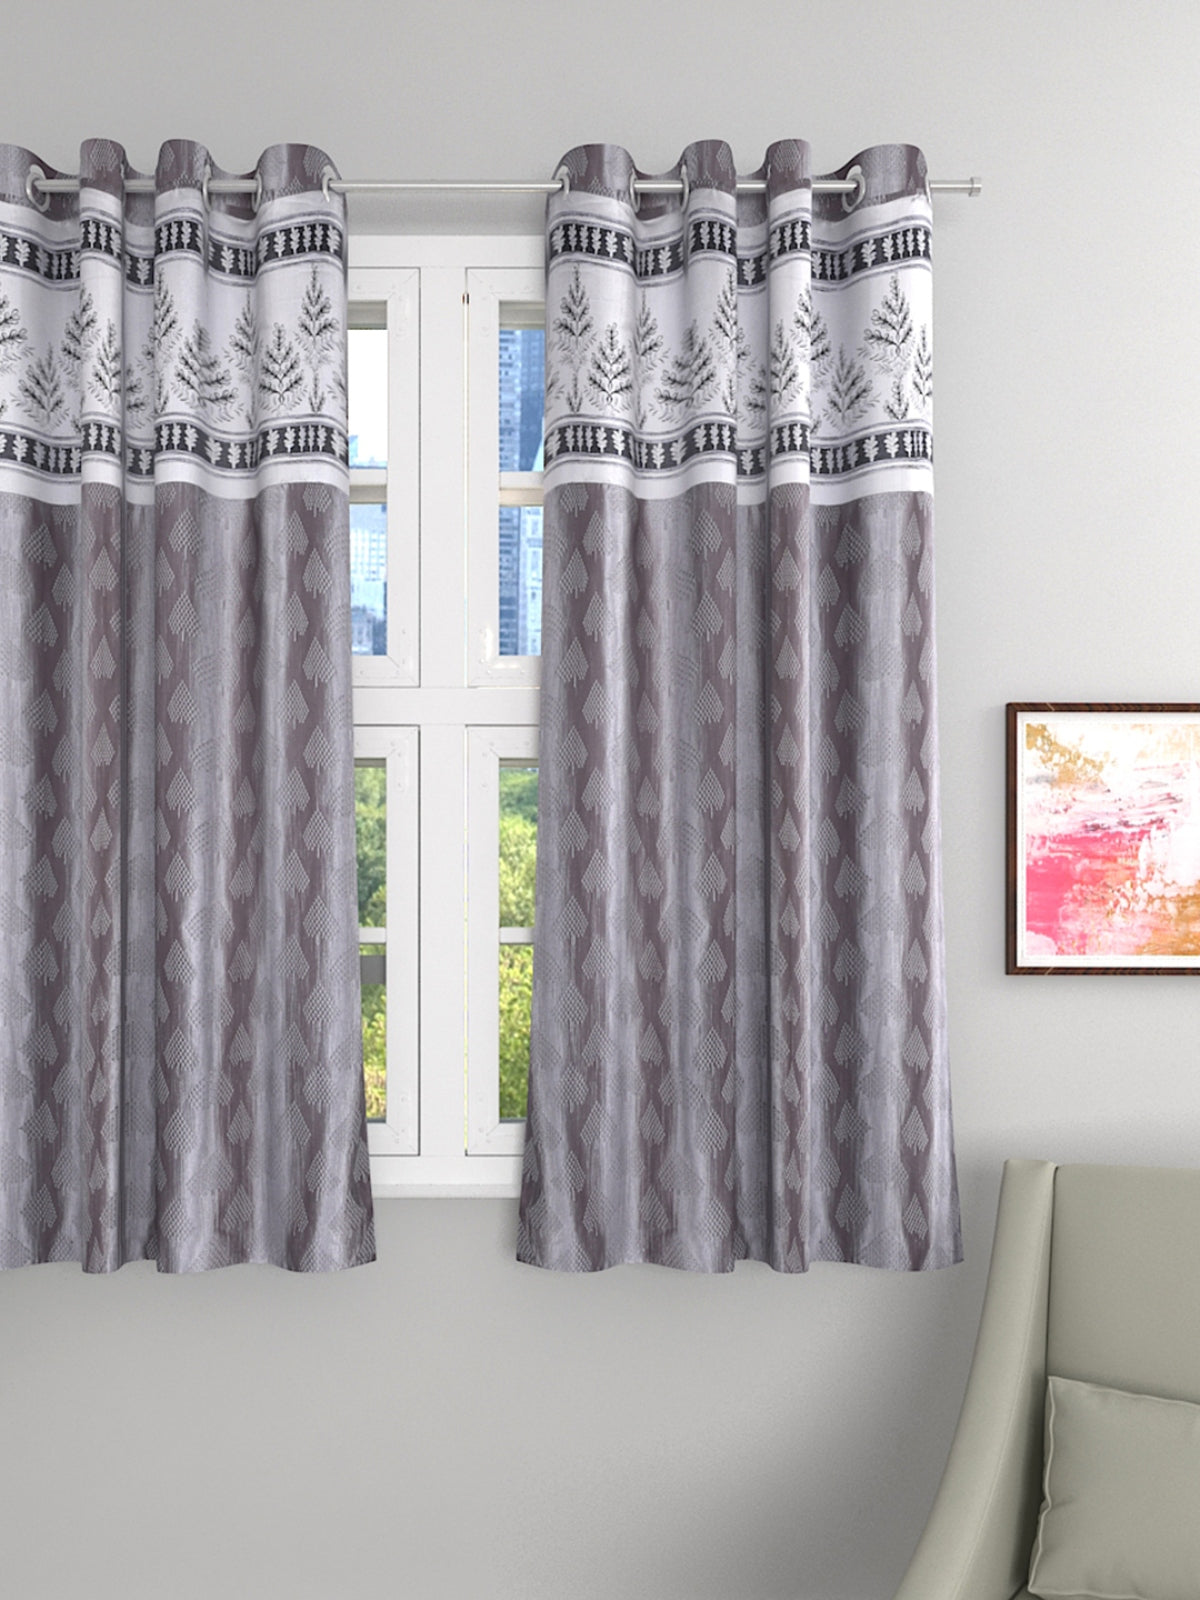 Romee Grey Leafy Patterned Set of 1 Window Curtains